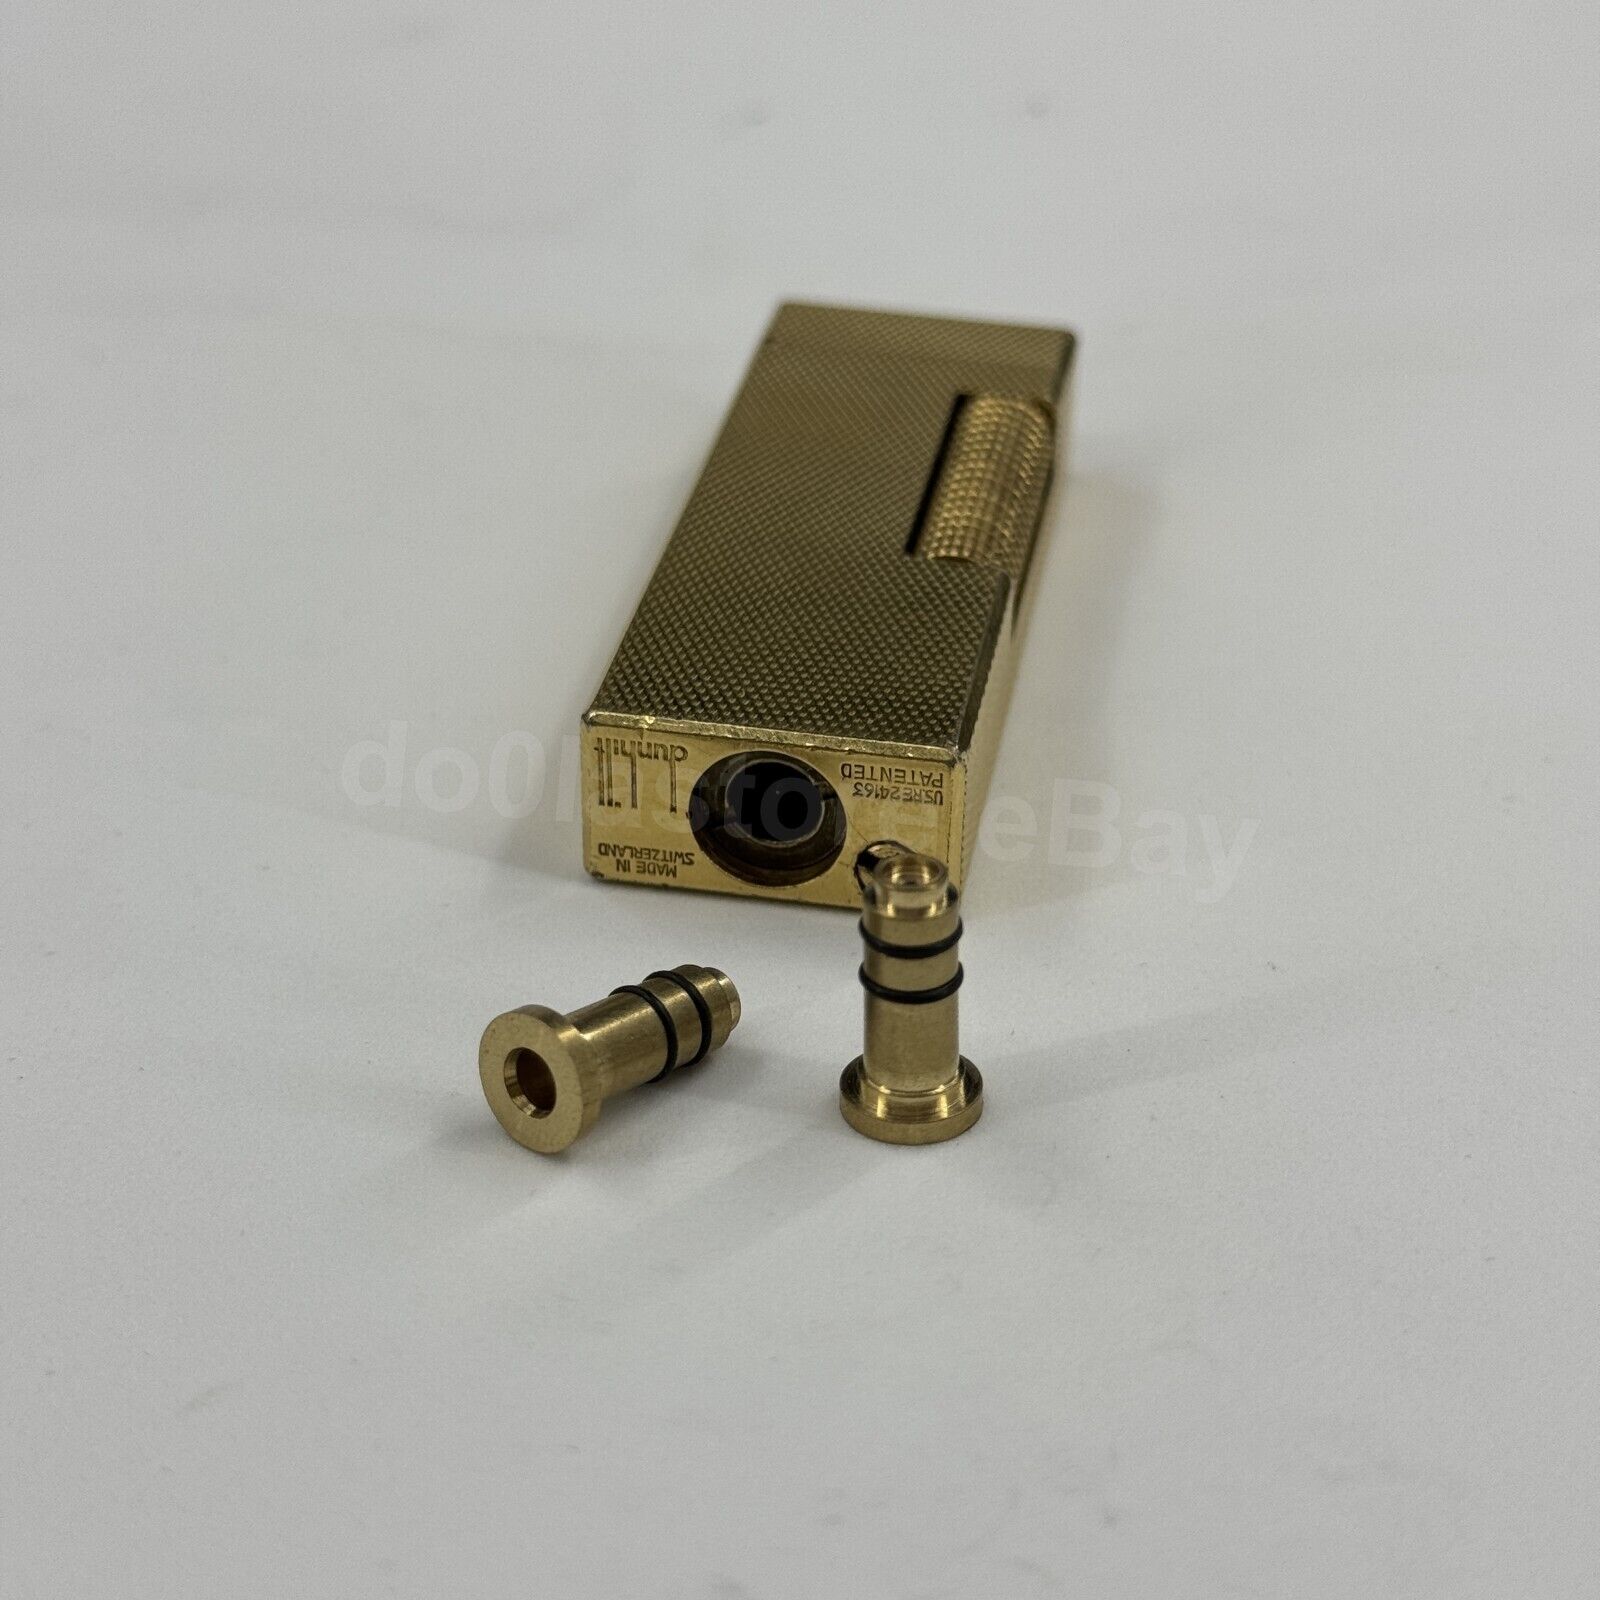 2pcs brass gas filling adapters for Dunhill Dress/ Rollagas lighters perfect fit